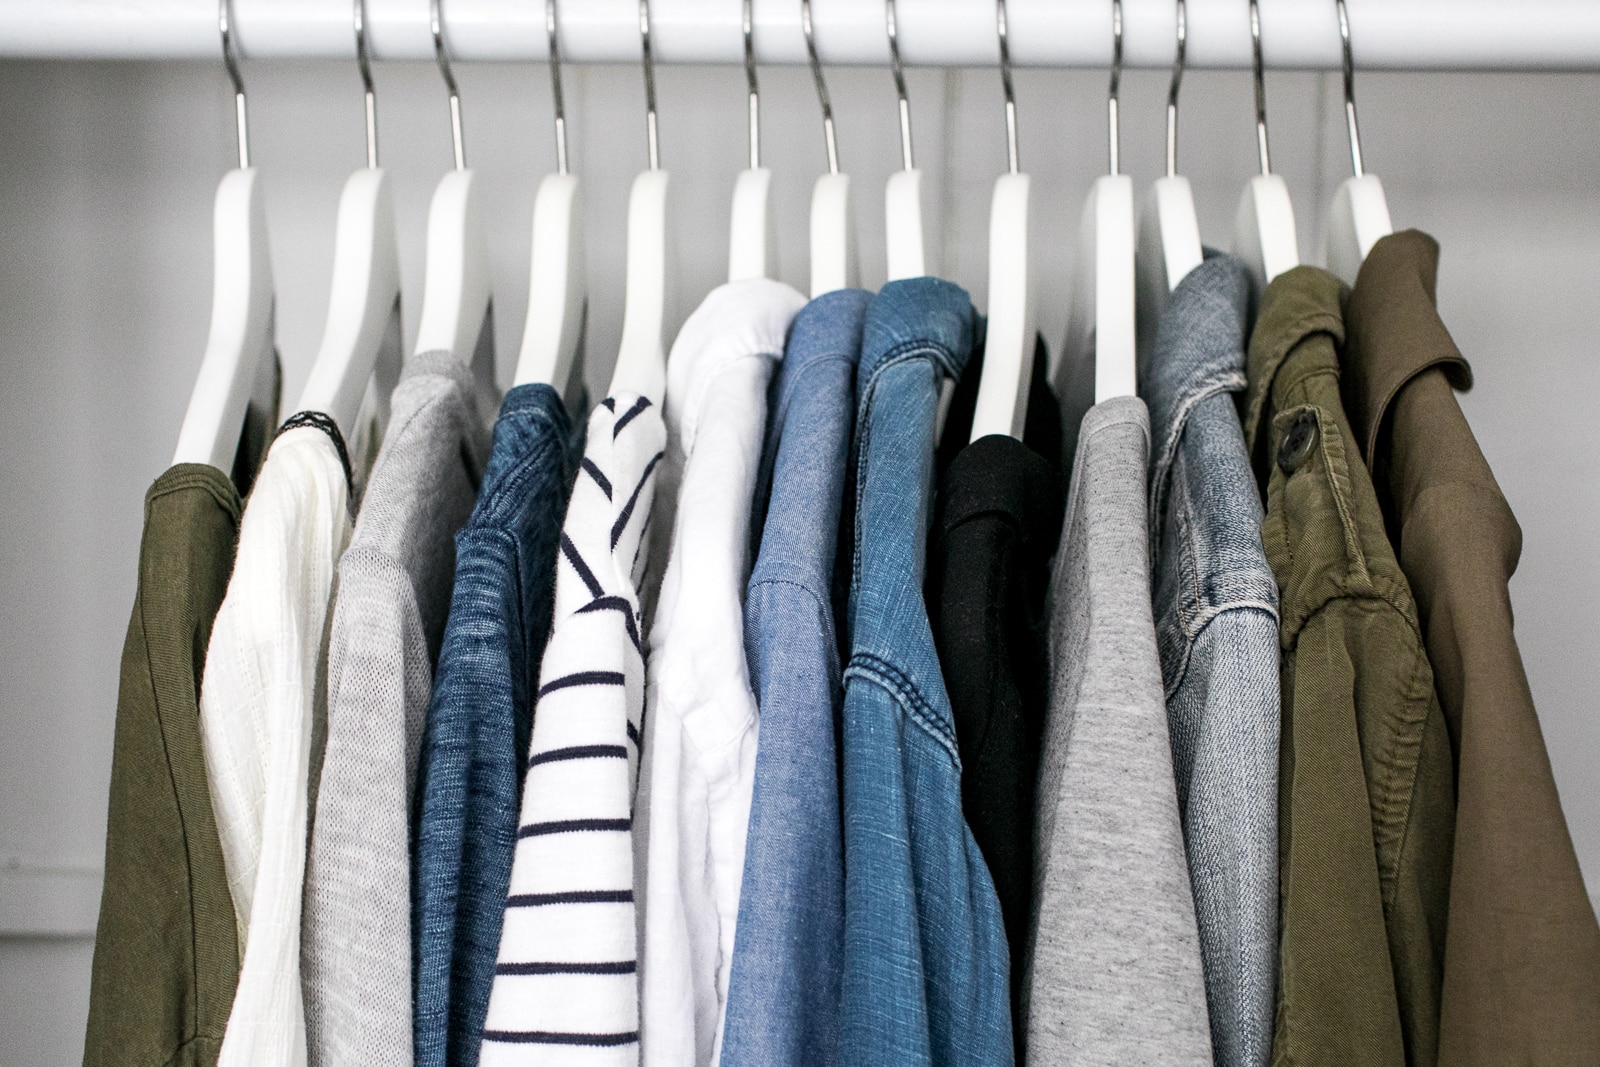 The Essential items you need for your closet this spring. A Free Worksheet is included with a full checklist to help you narrow in on what you need in your closet for spring. The best way to build a seasonal closet. More on The Fresh Exchange